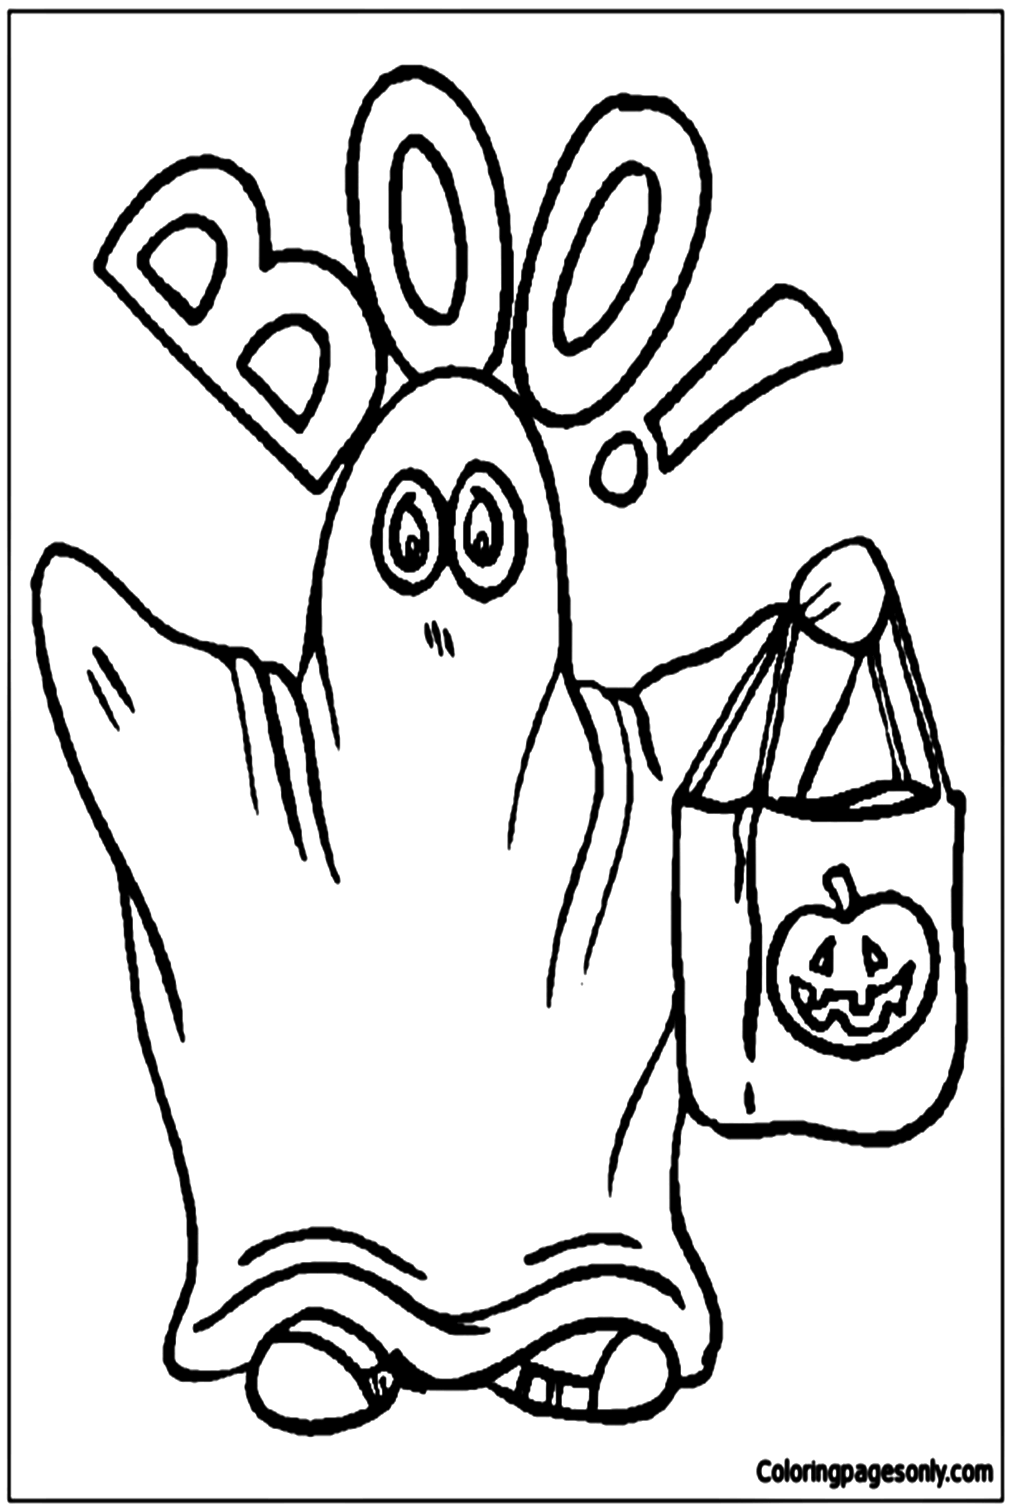 Boo Ghost Coloring Pages